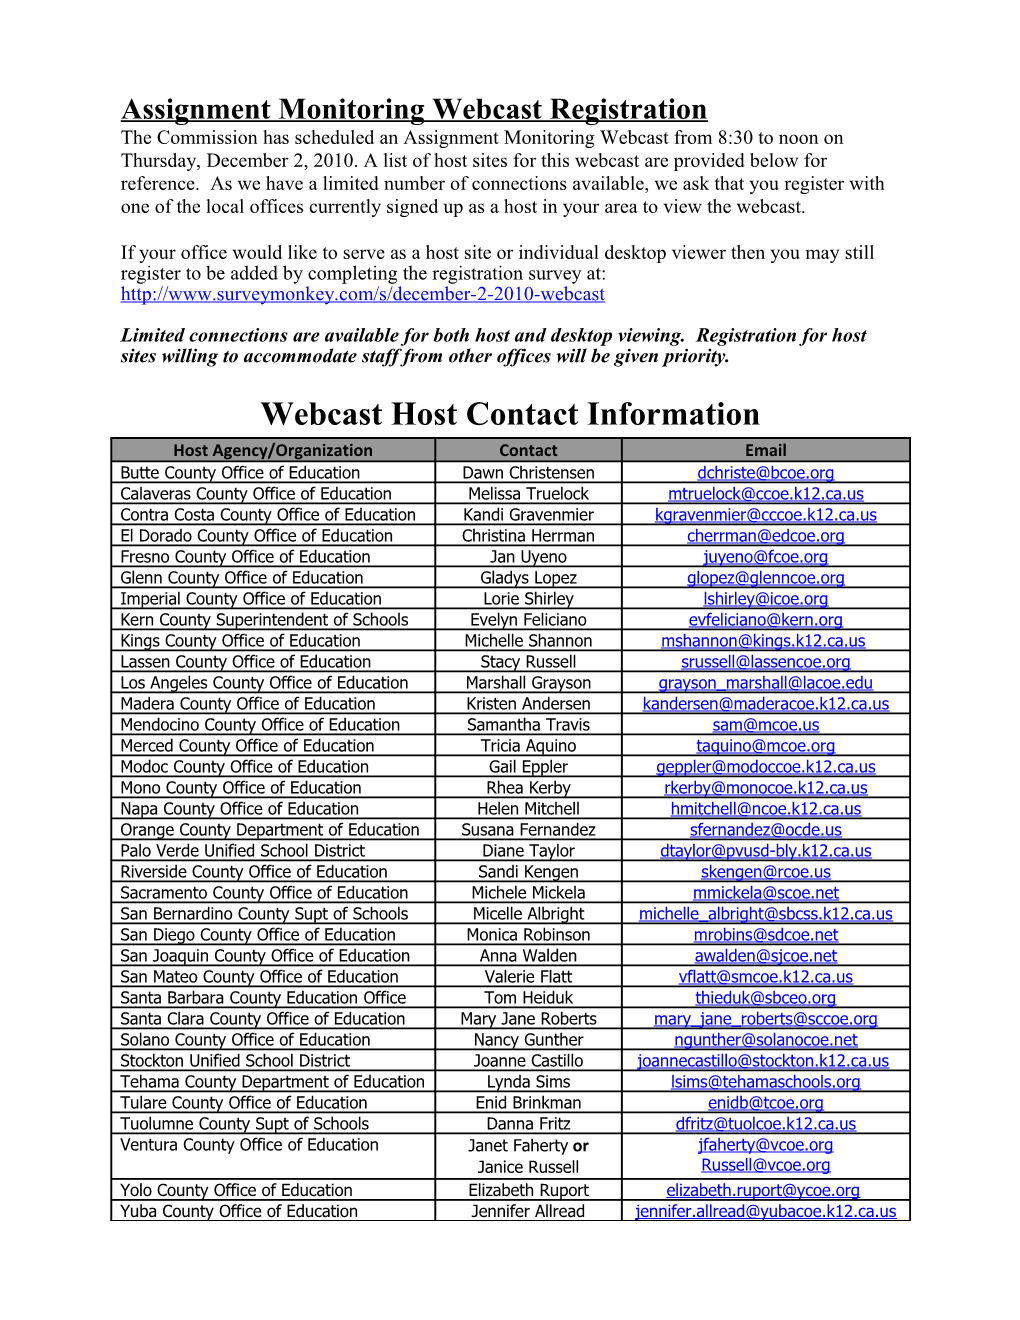 Webcast Host Contact Information